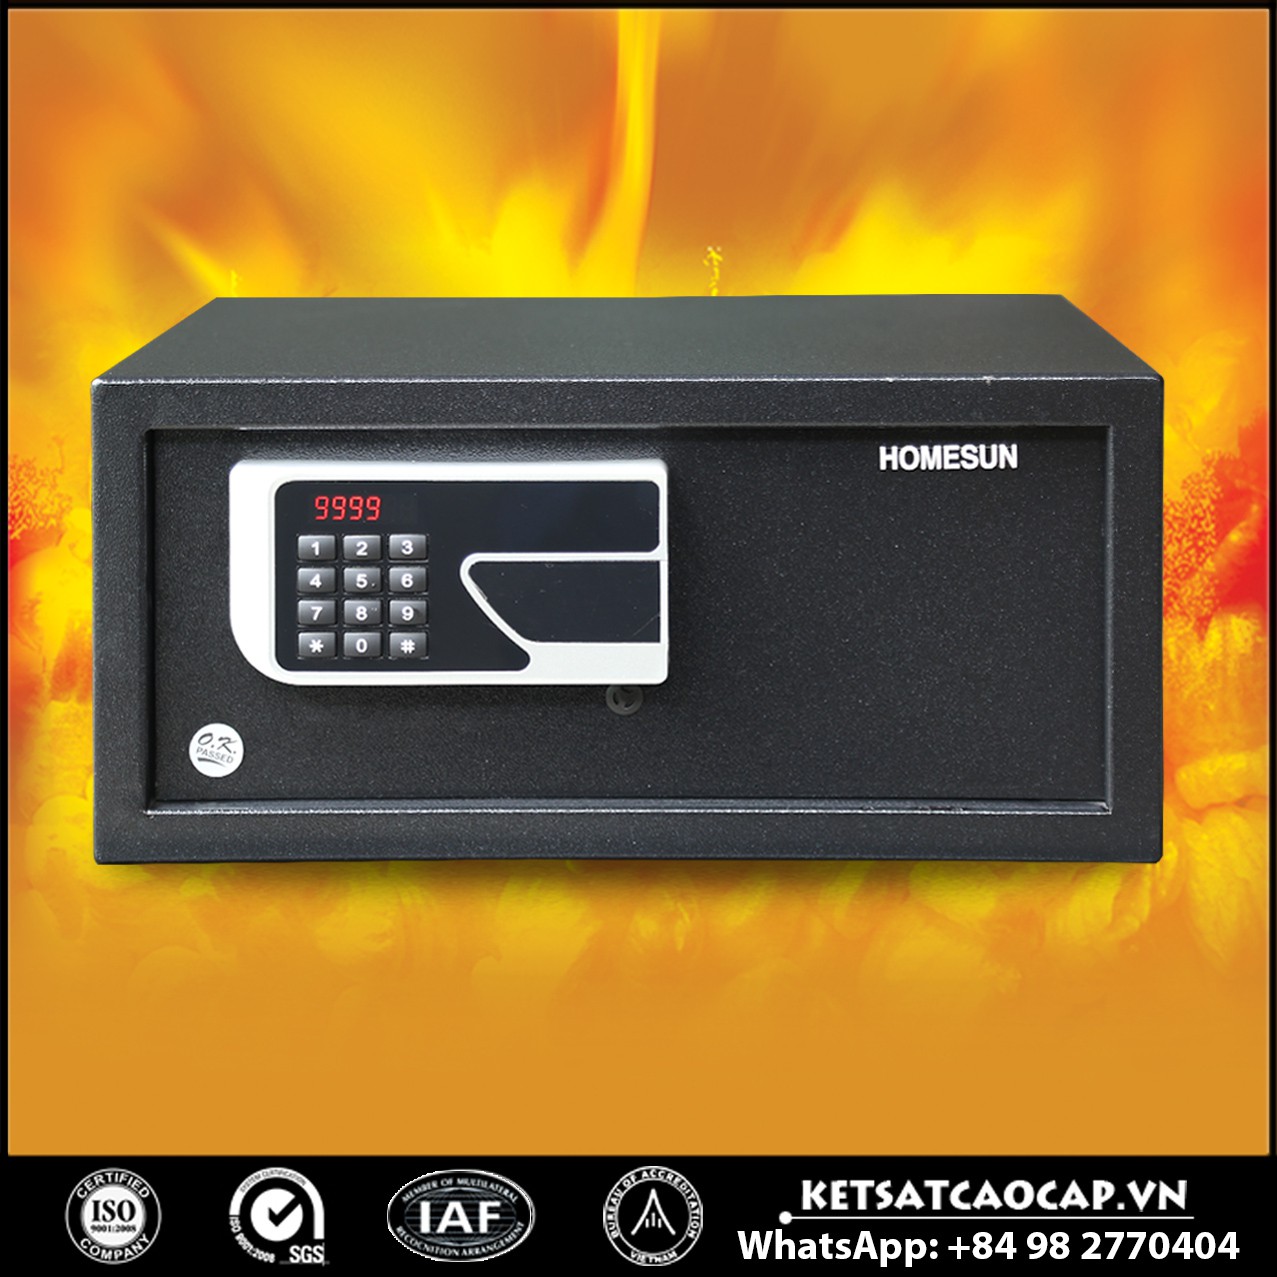 Used Hotel Safes Factory